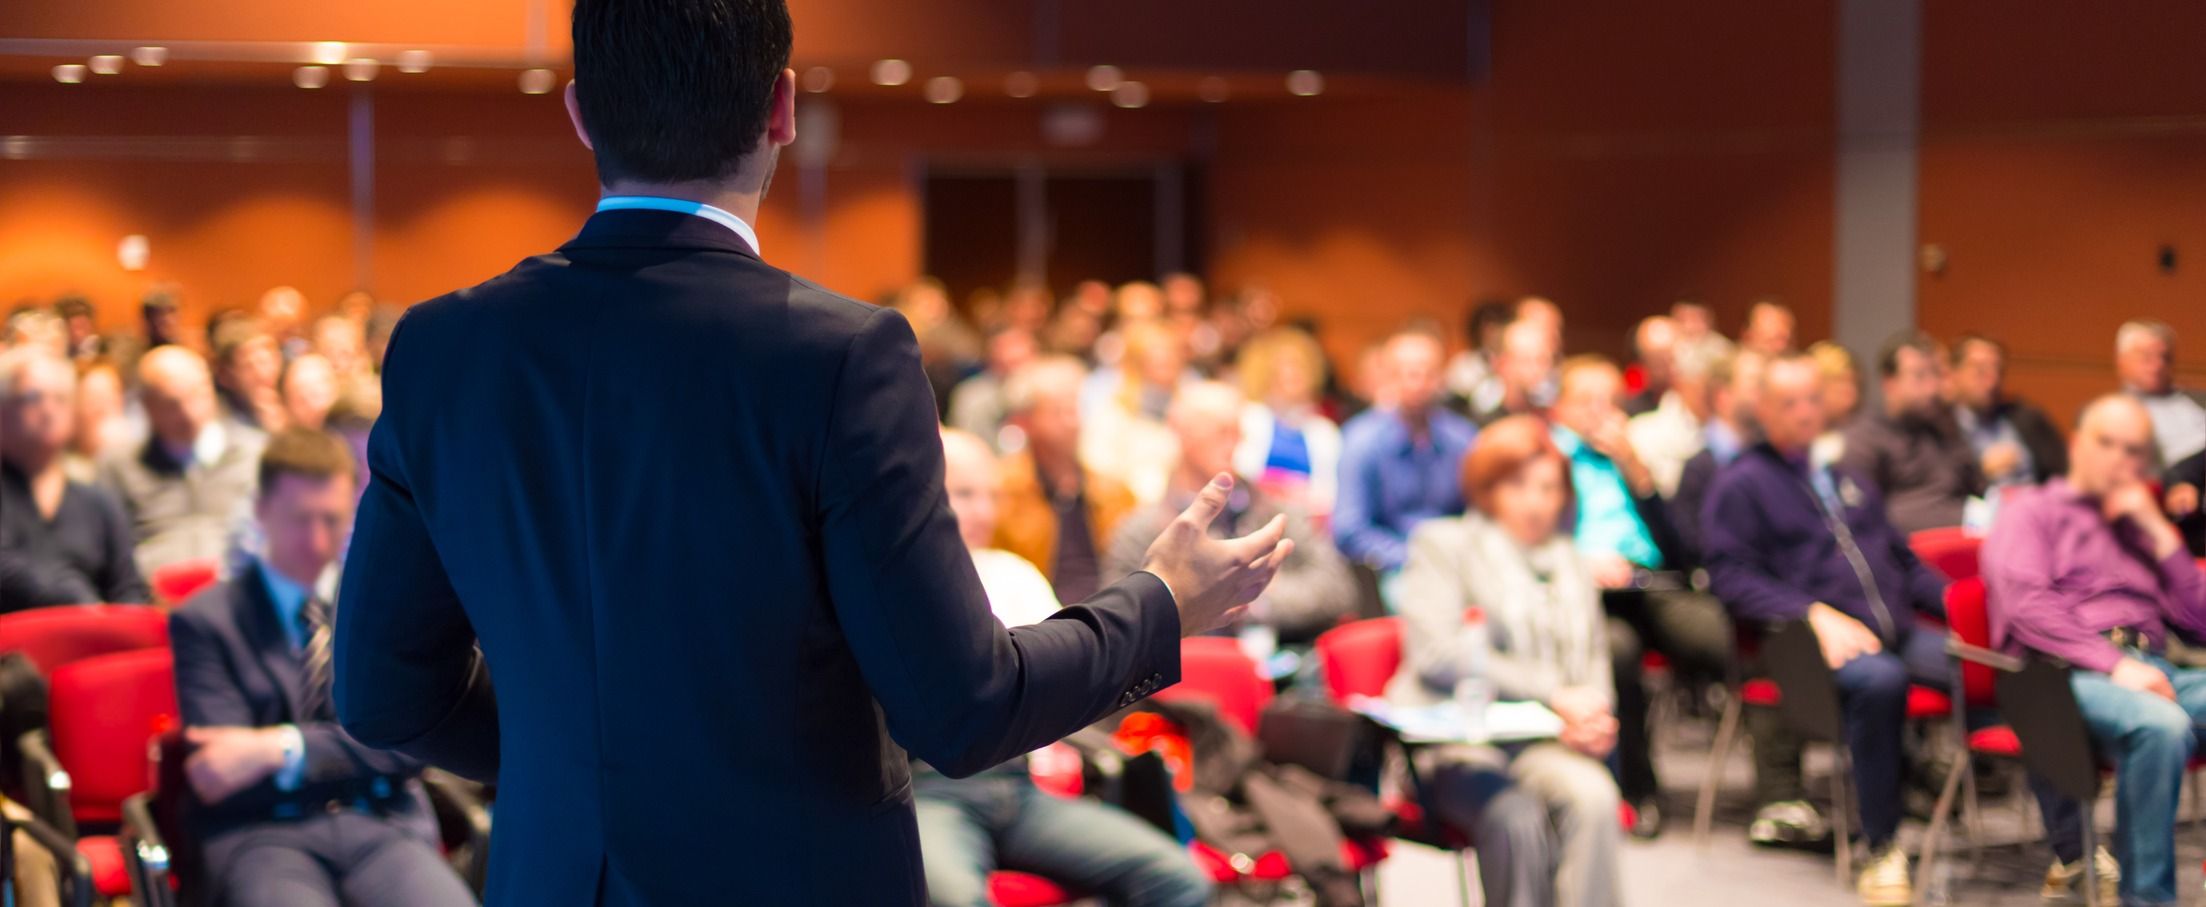 Advantages of Working with a Conference Management Company